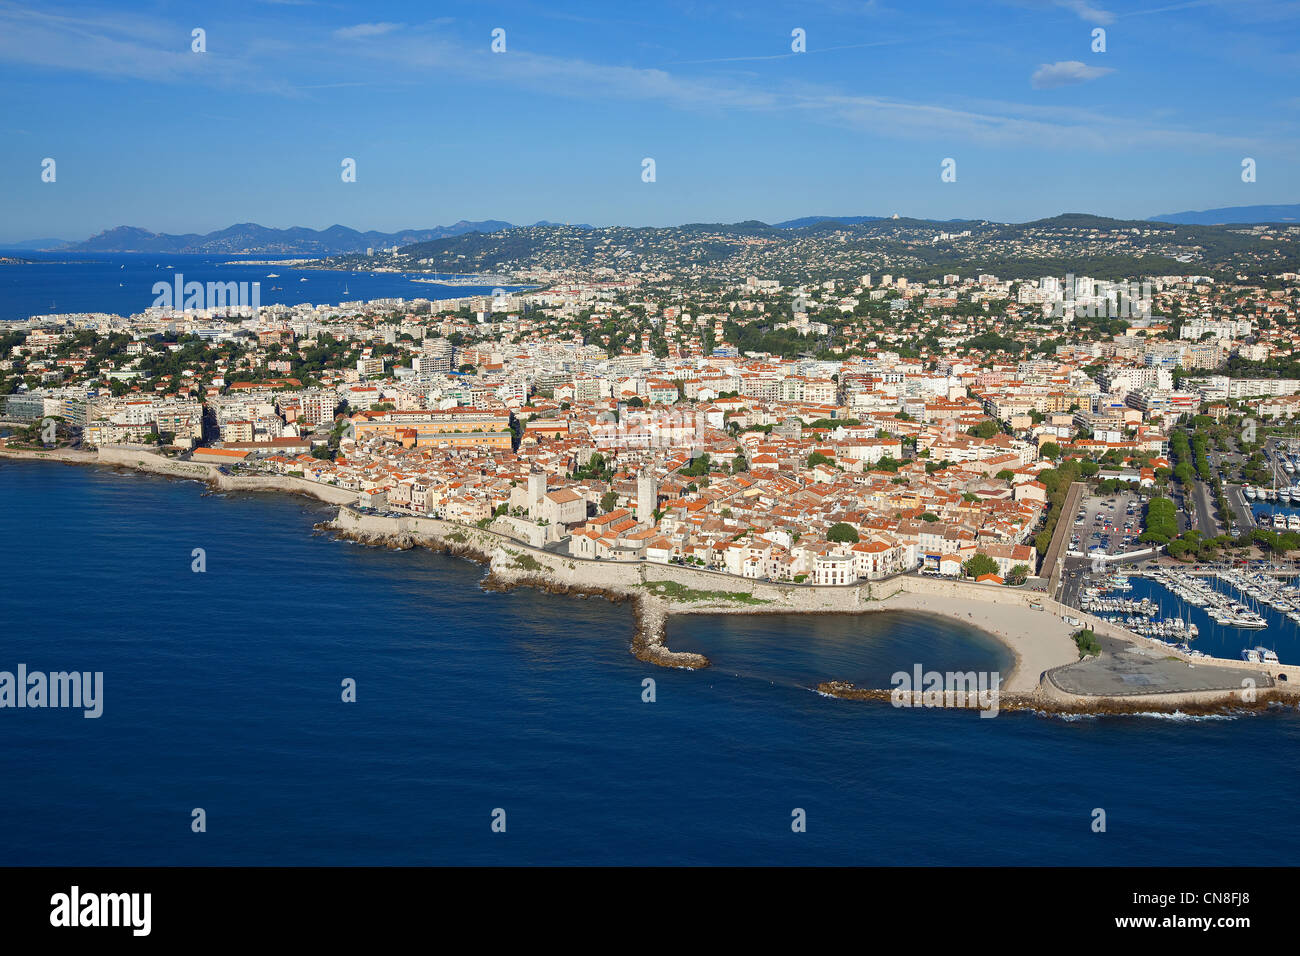 France, Alpes Maritimes, Antibes, old town and Cathedral Notre Dame de la Plata in the foreground (aerial view) Stock Photo